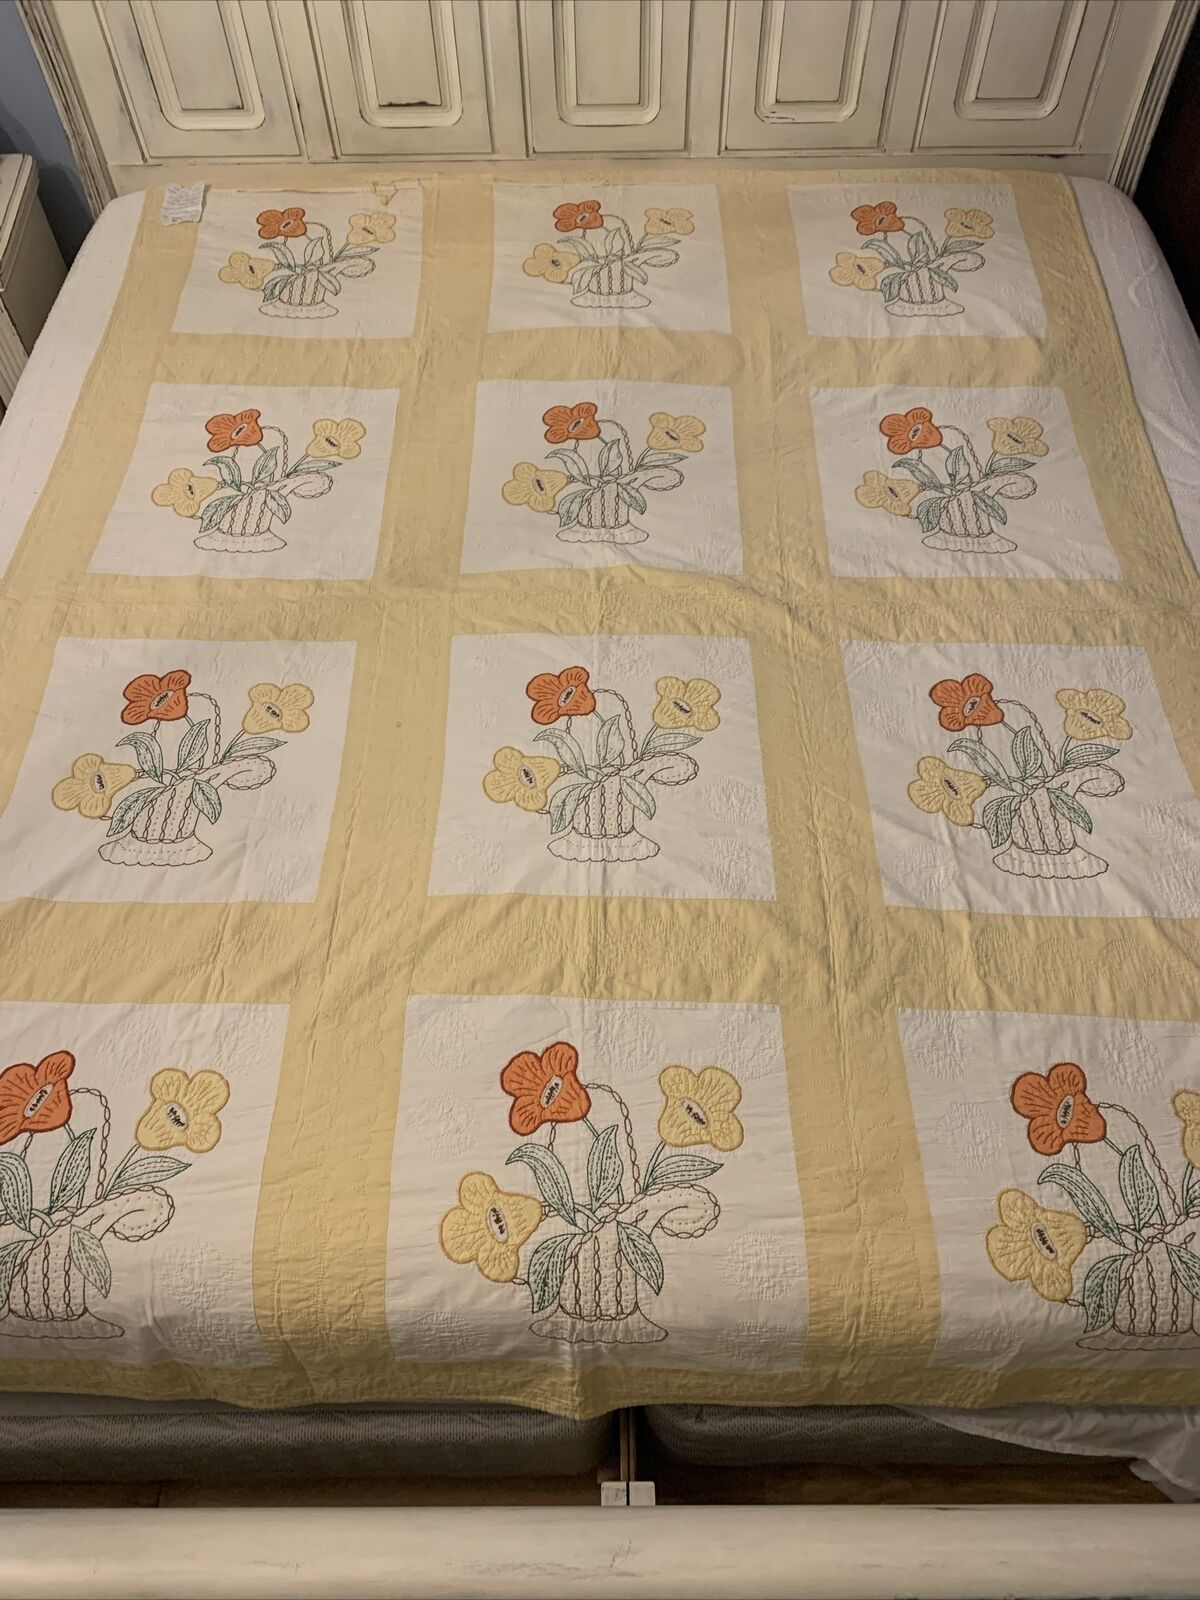 Vintage 1940s Handmade Hand quilted Floral Embroidery Quilt Butter Yellow READ